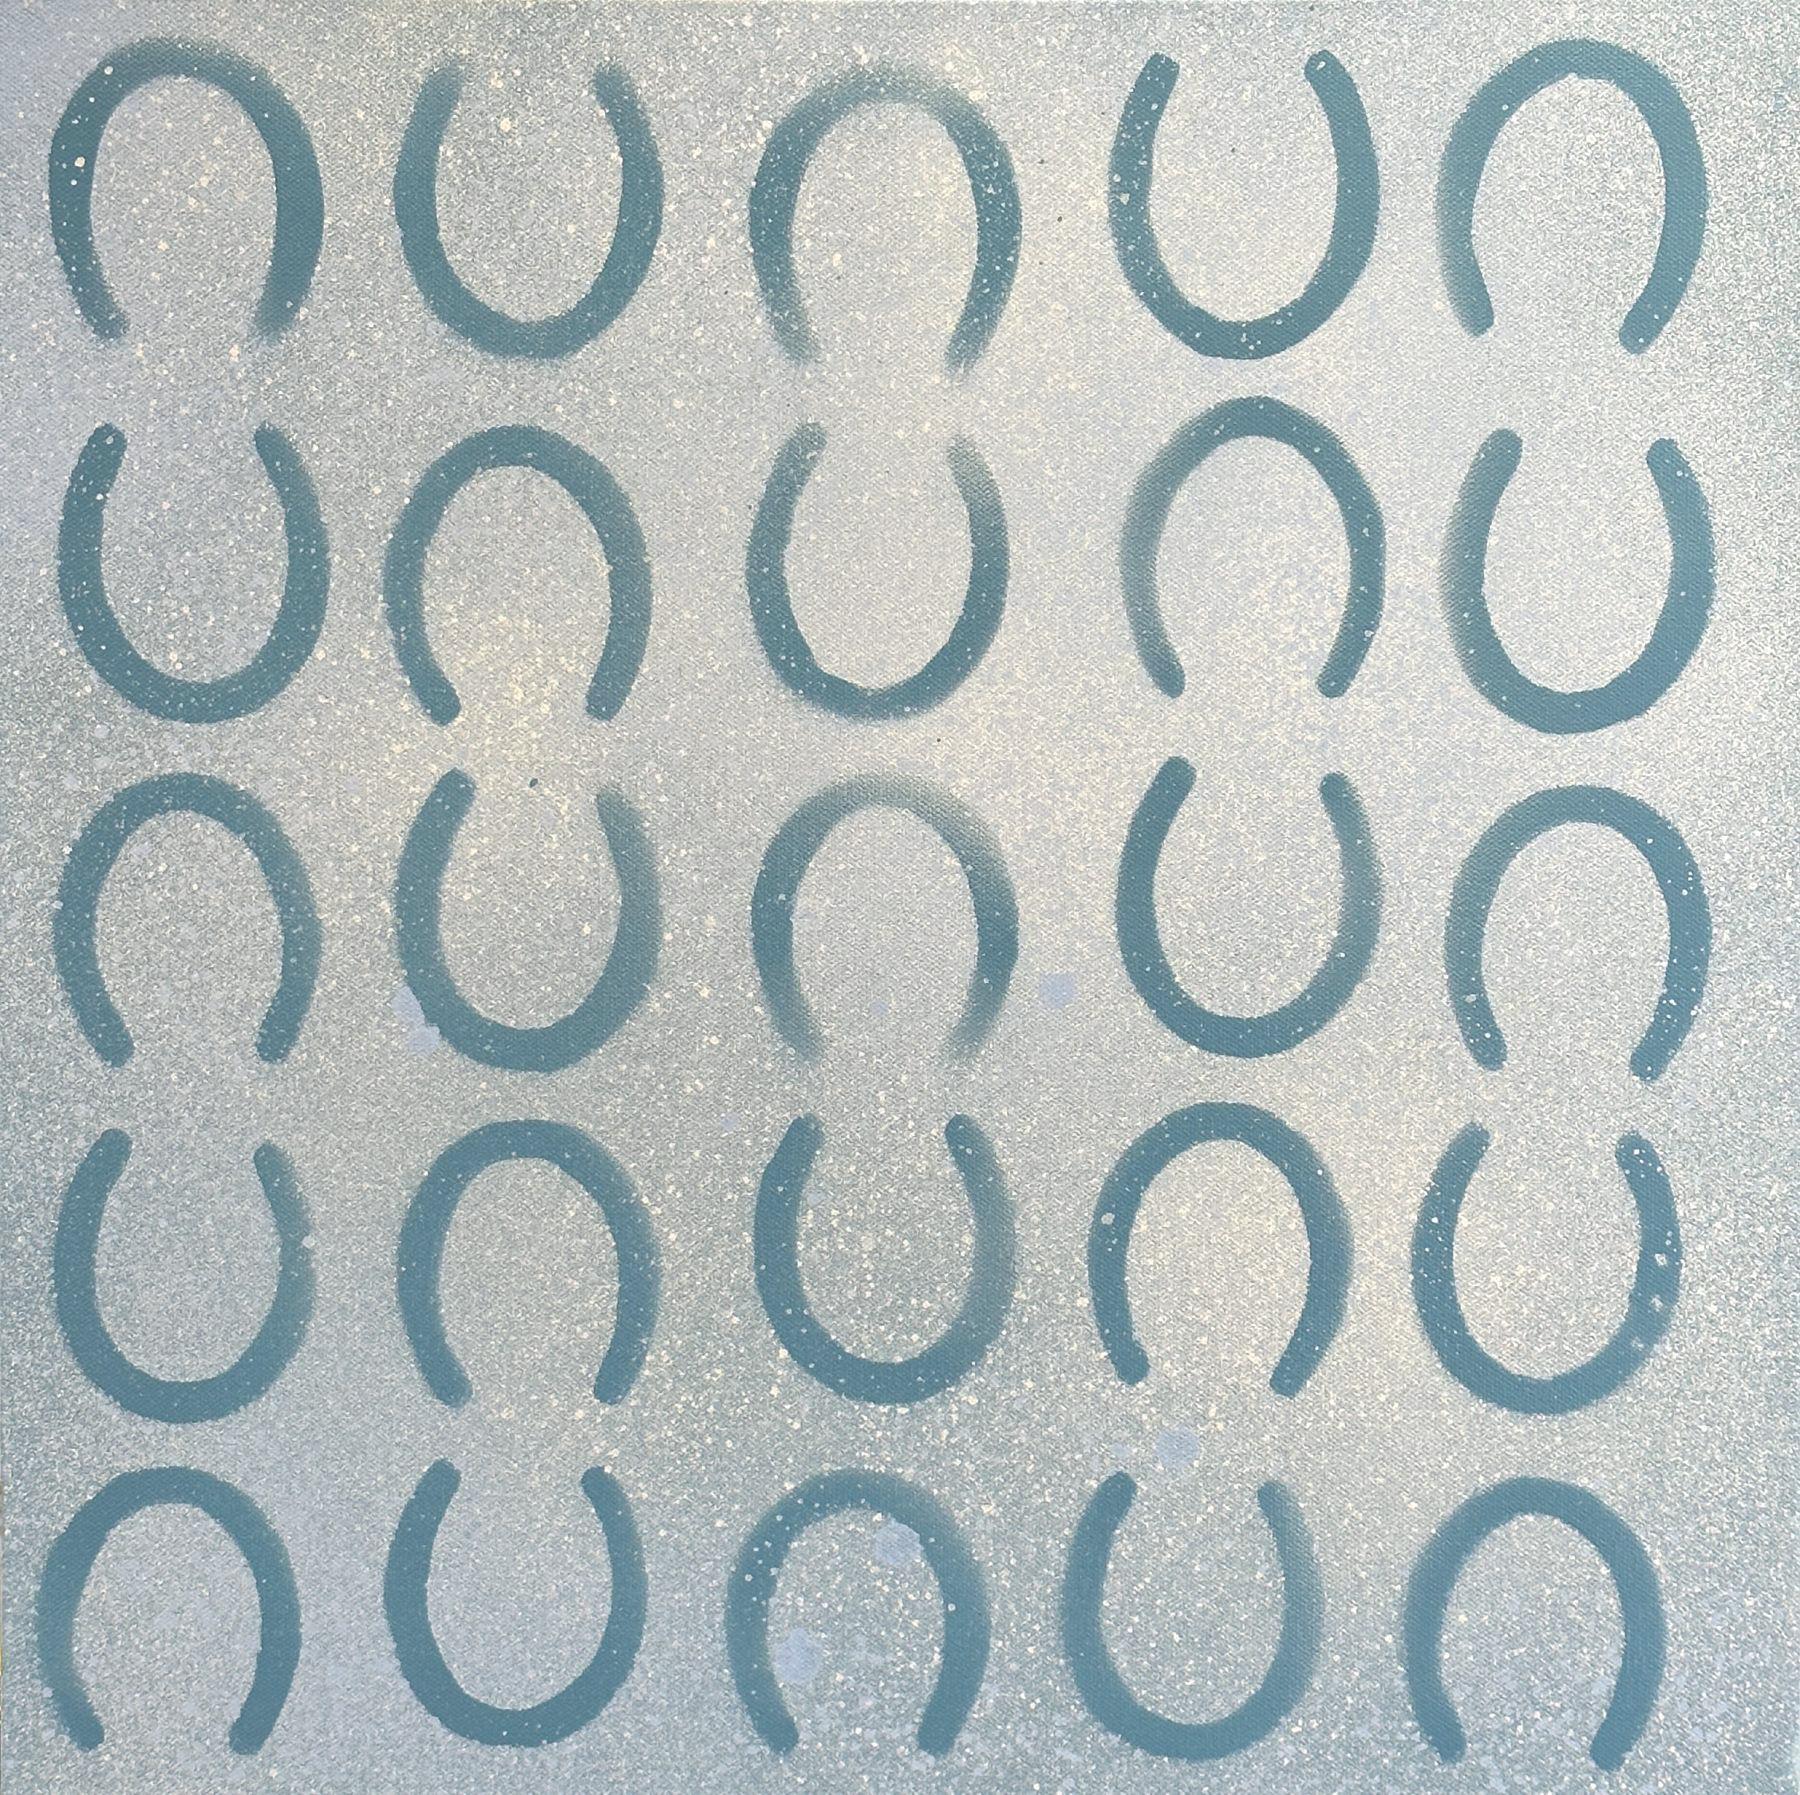 "Racing Feet II" is a 20x20 mixed media painting on canvas by artist Matthew Jay Russell, featuring a grid of repeating horseshoes. Layering of textures and mixed media in soft blues and whites adds to the fun and whimsical abstracted quality of the